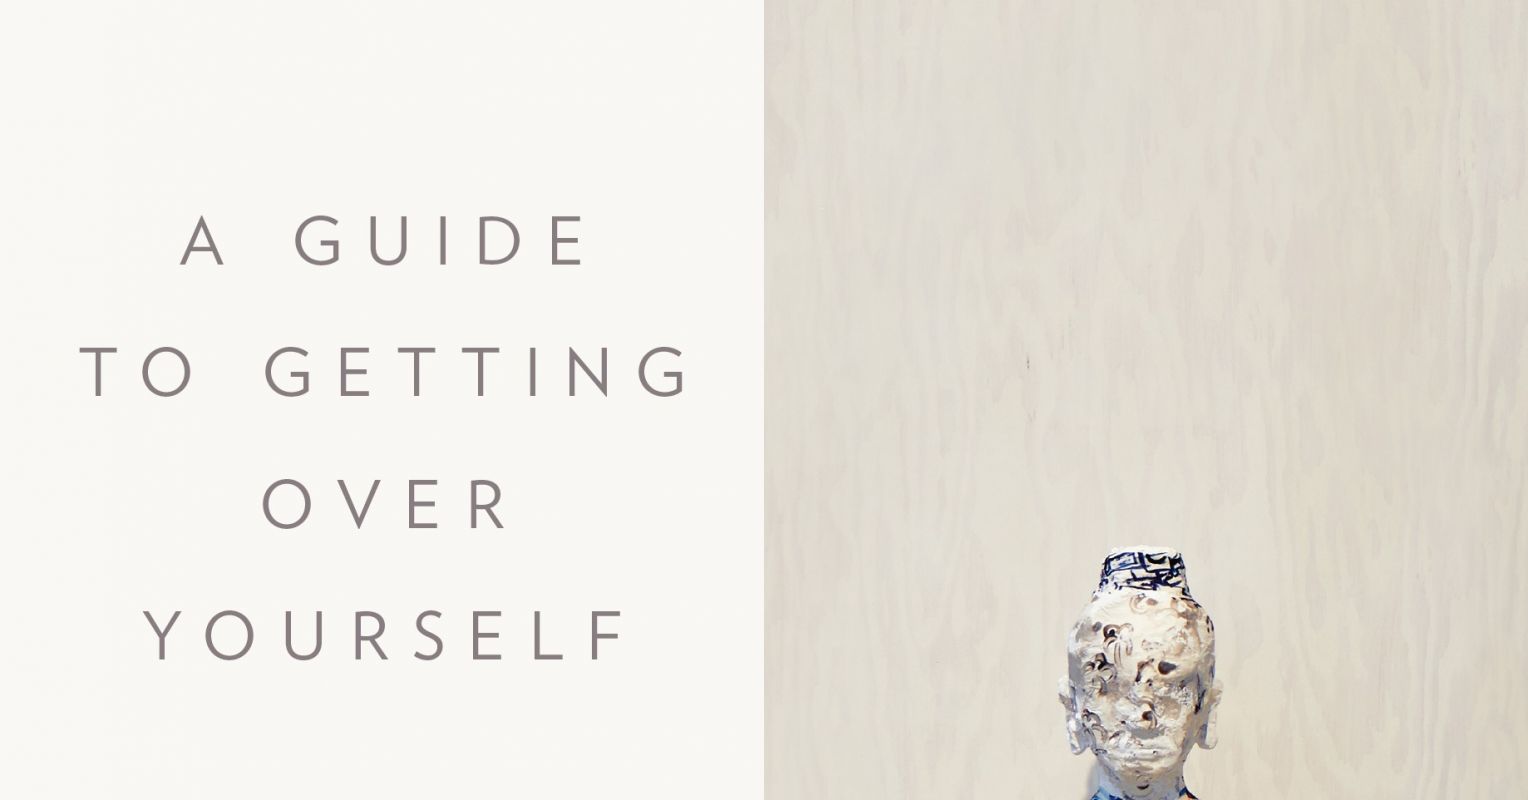 Get Over Yourself: What This Means (and How to Do It)